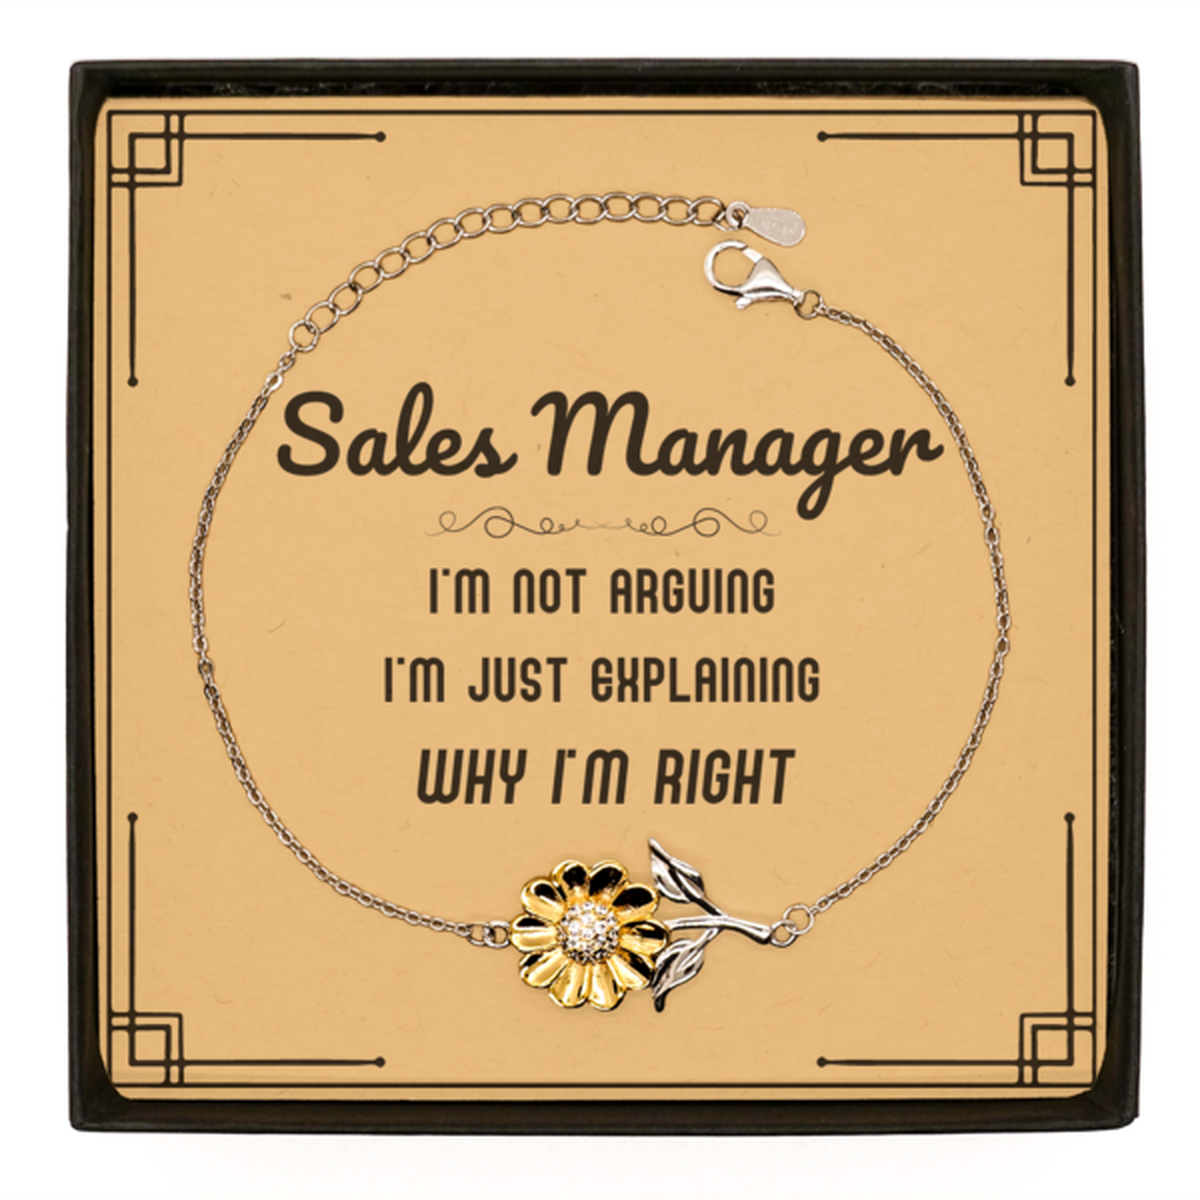 Sales Manager I'm not Arguing. I'm Just Explaining Why I'm RIGHT Sunflower Bracelet, Funny Saying Quote Sales Manager Gifts For Sales Manager Message Card Graduation Birthday Christmas Gifts for Men Women Coworker